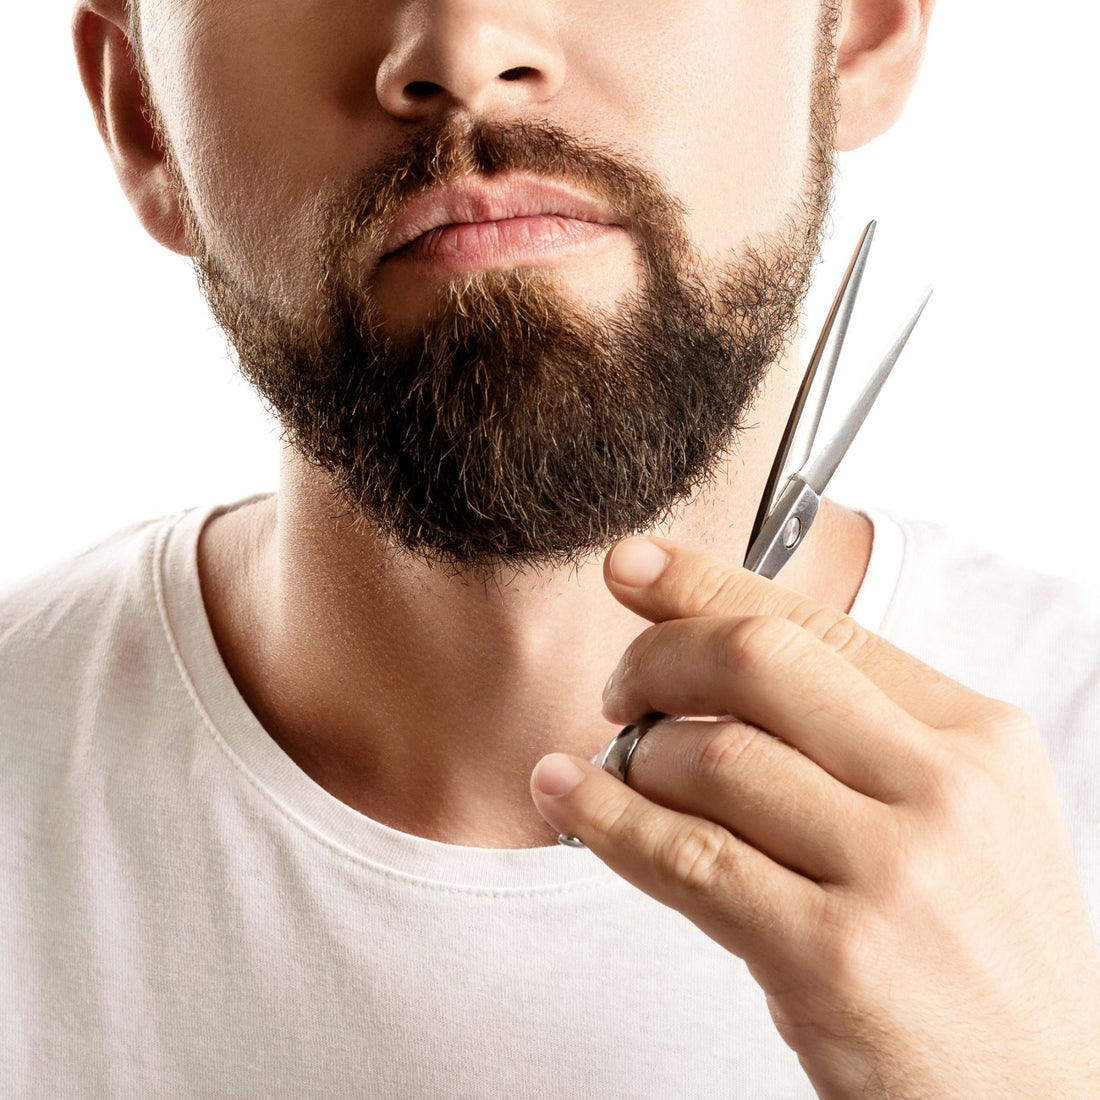 Man with short beard trimming his beard with scissors